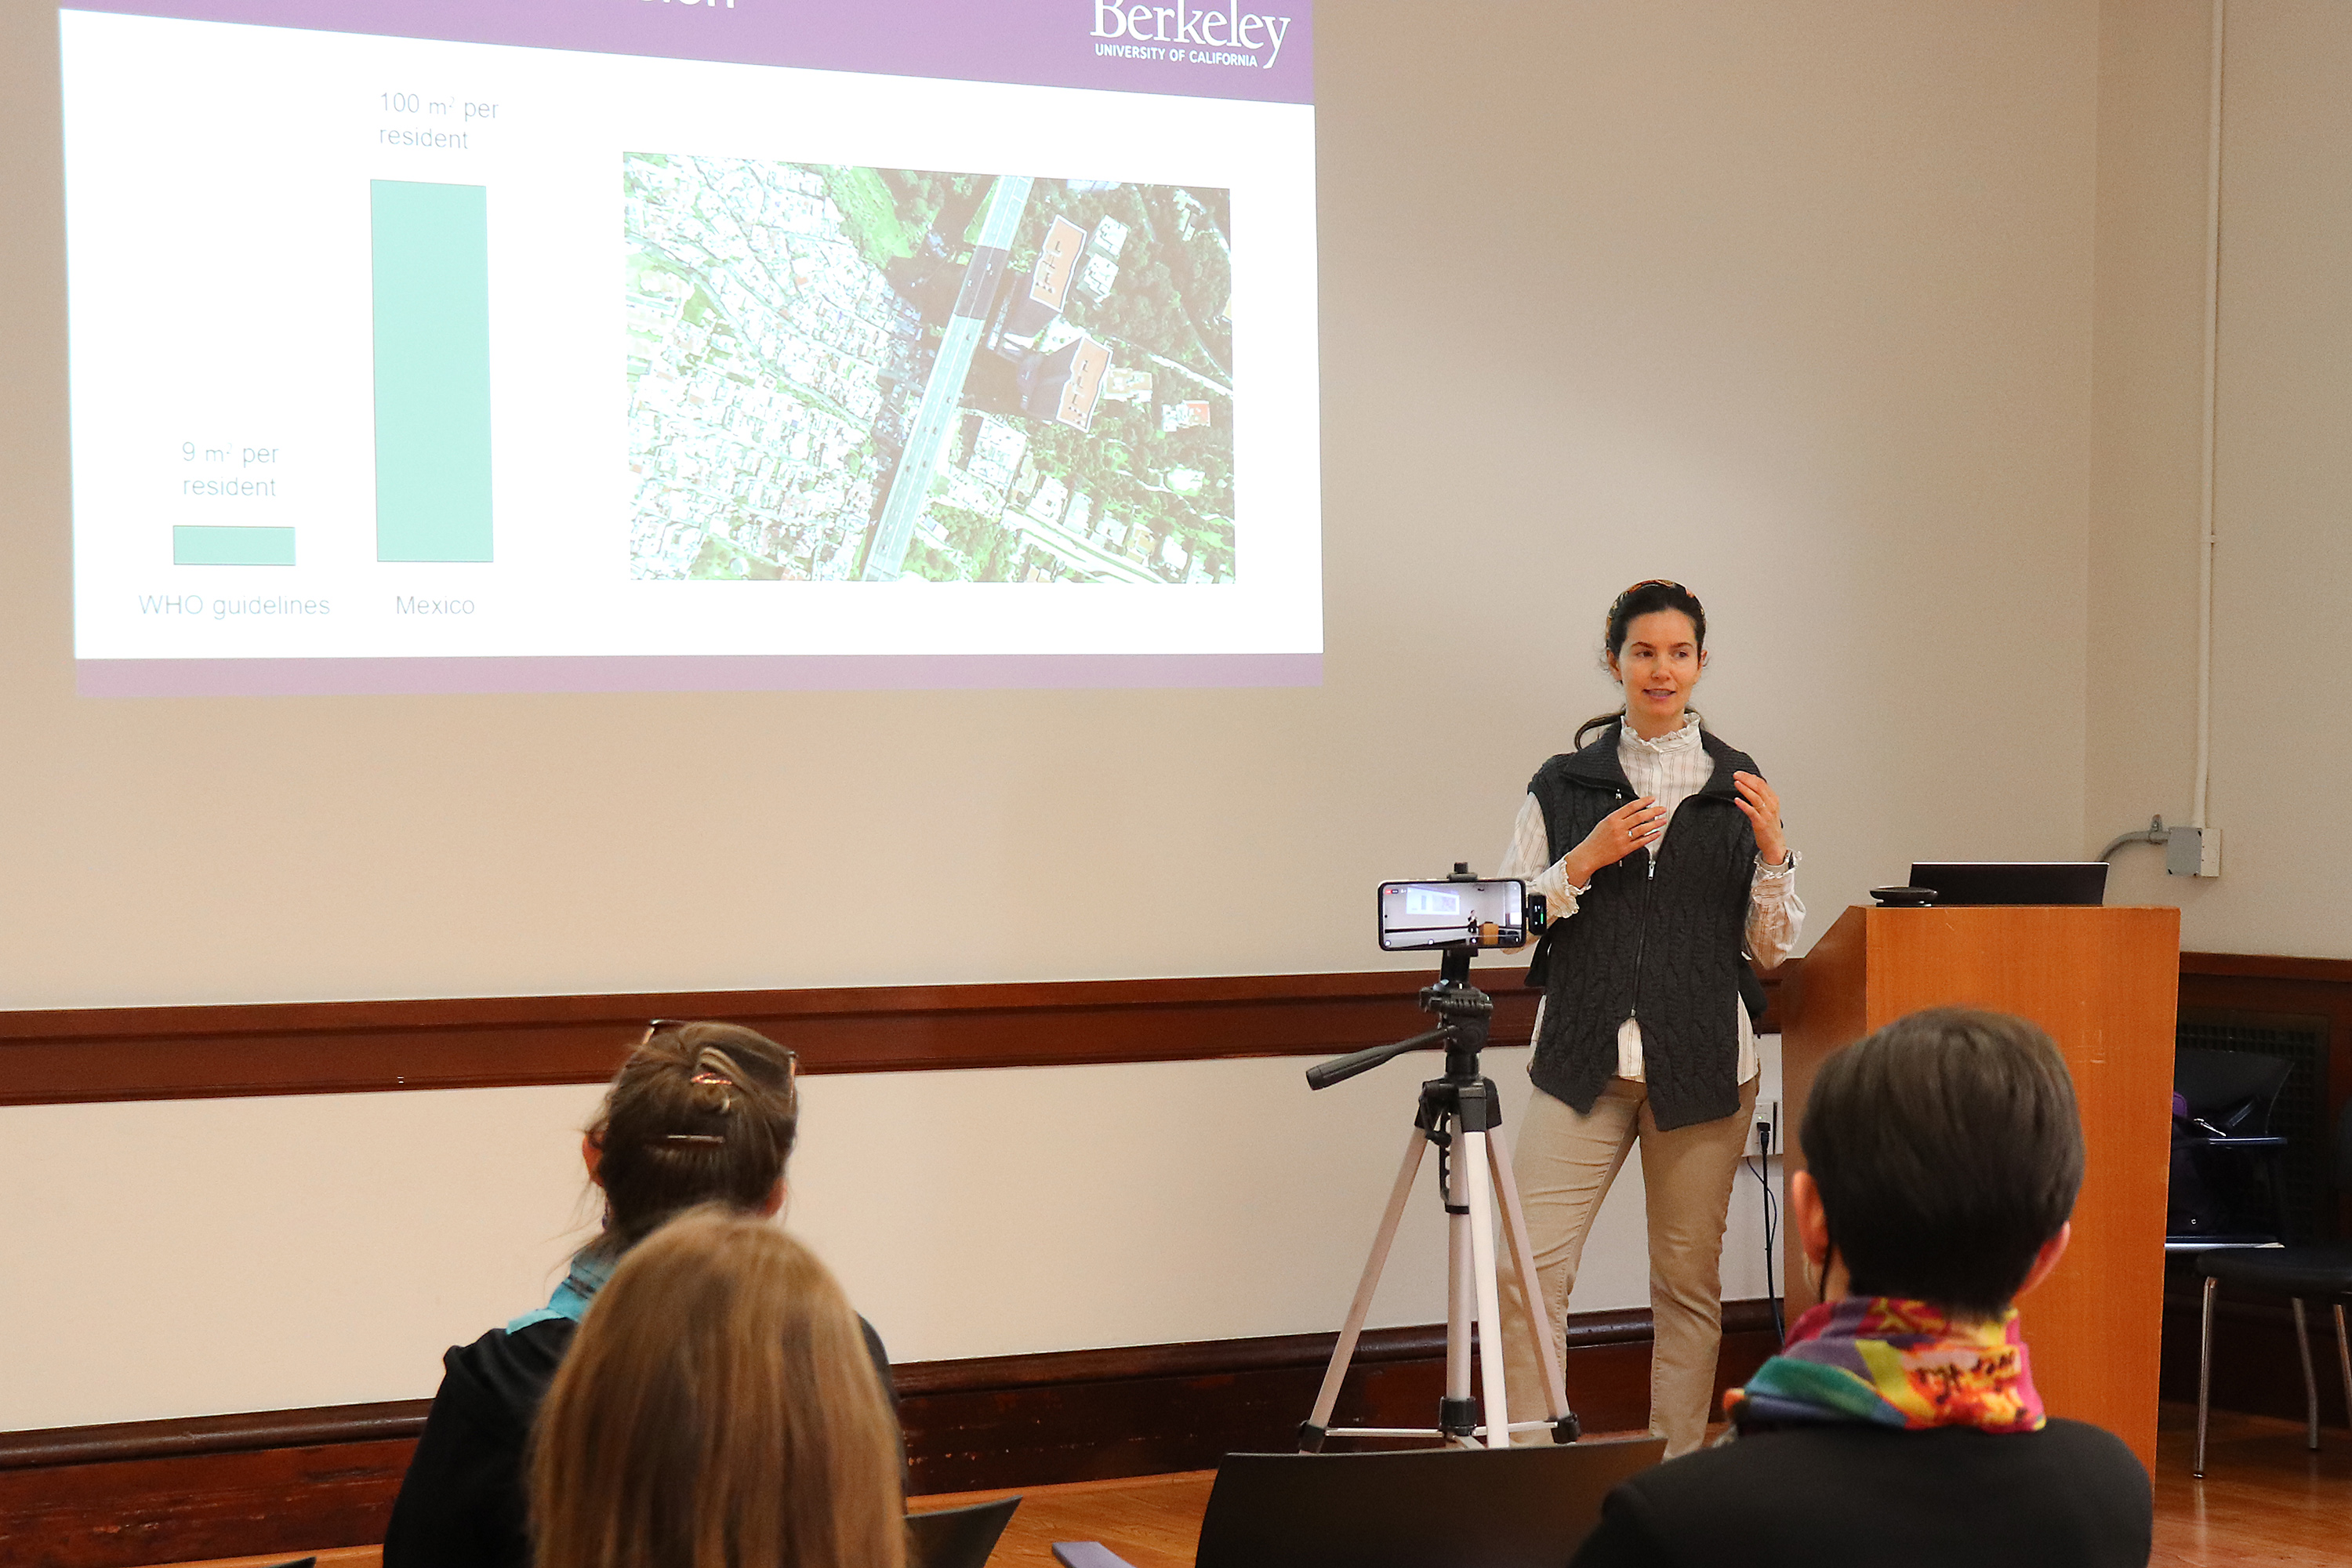 UC Berkeley Postdoctoral Researcher Maryia Bakhtsiyarava presented Greenspace and Depression in Mexico: Different greenspace metrics and different spatial scales on Friday, March 17, 2023 at the ITS Berkeley Transportation Seminar.